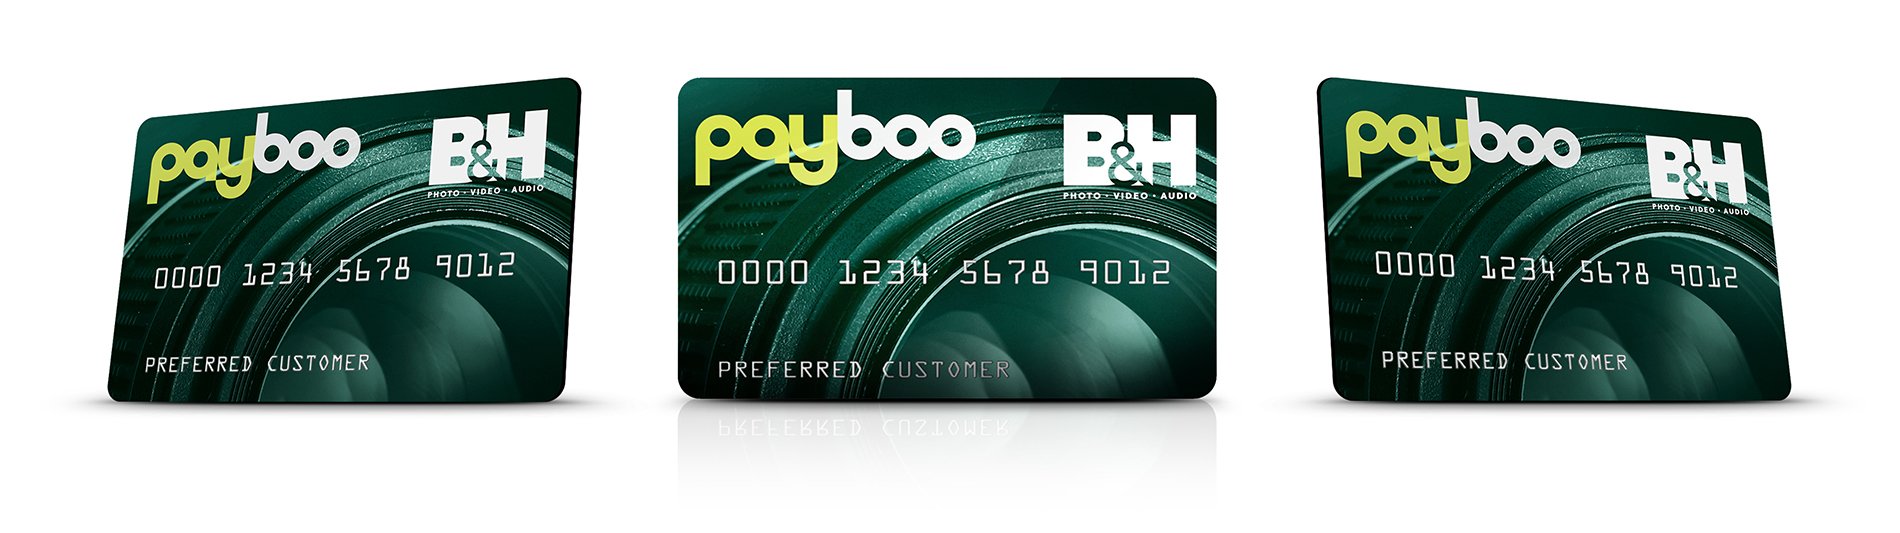 Payboo Card All Angles